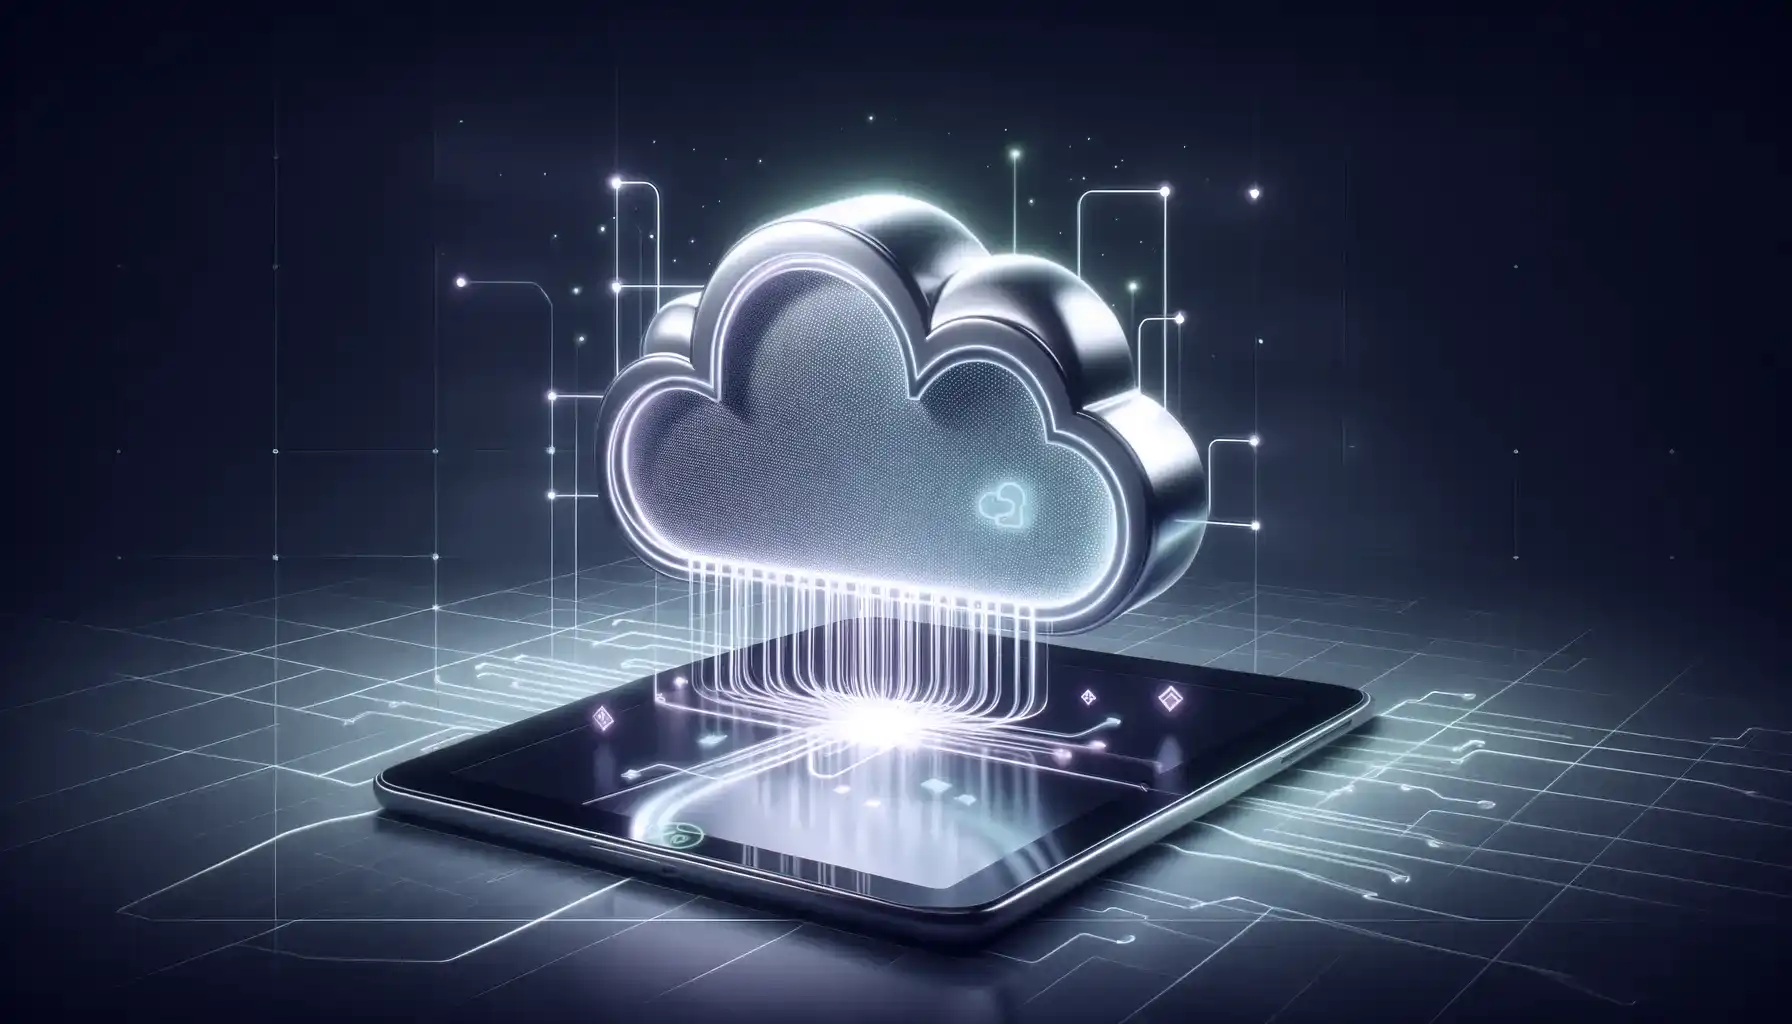  The image showcases a modern, user-friendly approach to cloud migration, featuring a sleek tablet with a luminous display of a cloud. This cloud icon symbolizes a simple, intuitive interface for managing cloud migration. Surrounding the tablet, animated green and purple data packets flow smoothly in and out, representing a streamlined and efficient data transfer process. The background is a minimalistic digital grid, subtly referencing the sophisticated, tailor-made configuration tools, secure networking options, and ready-to-use scripts available. The composition conveys the message of an accessible, secure, and hassle-free cloud migration experience.